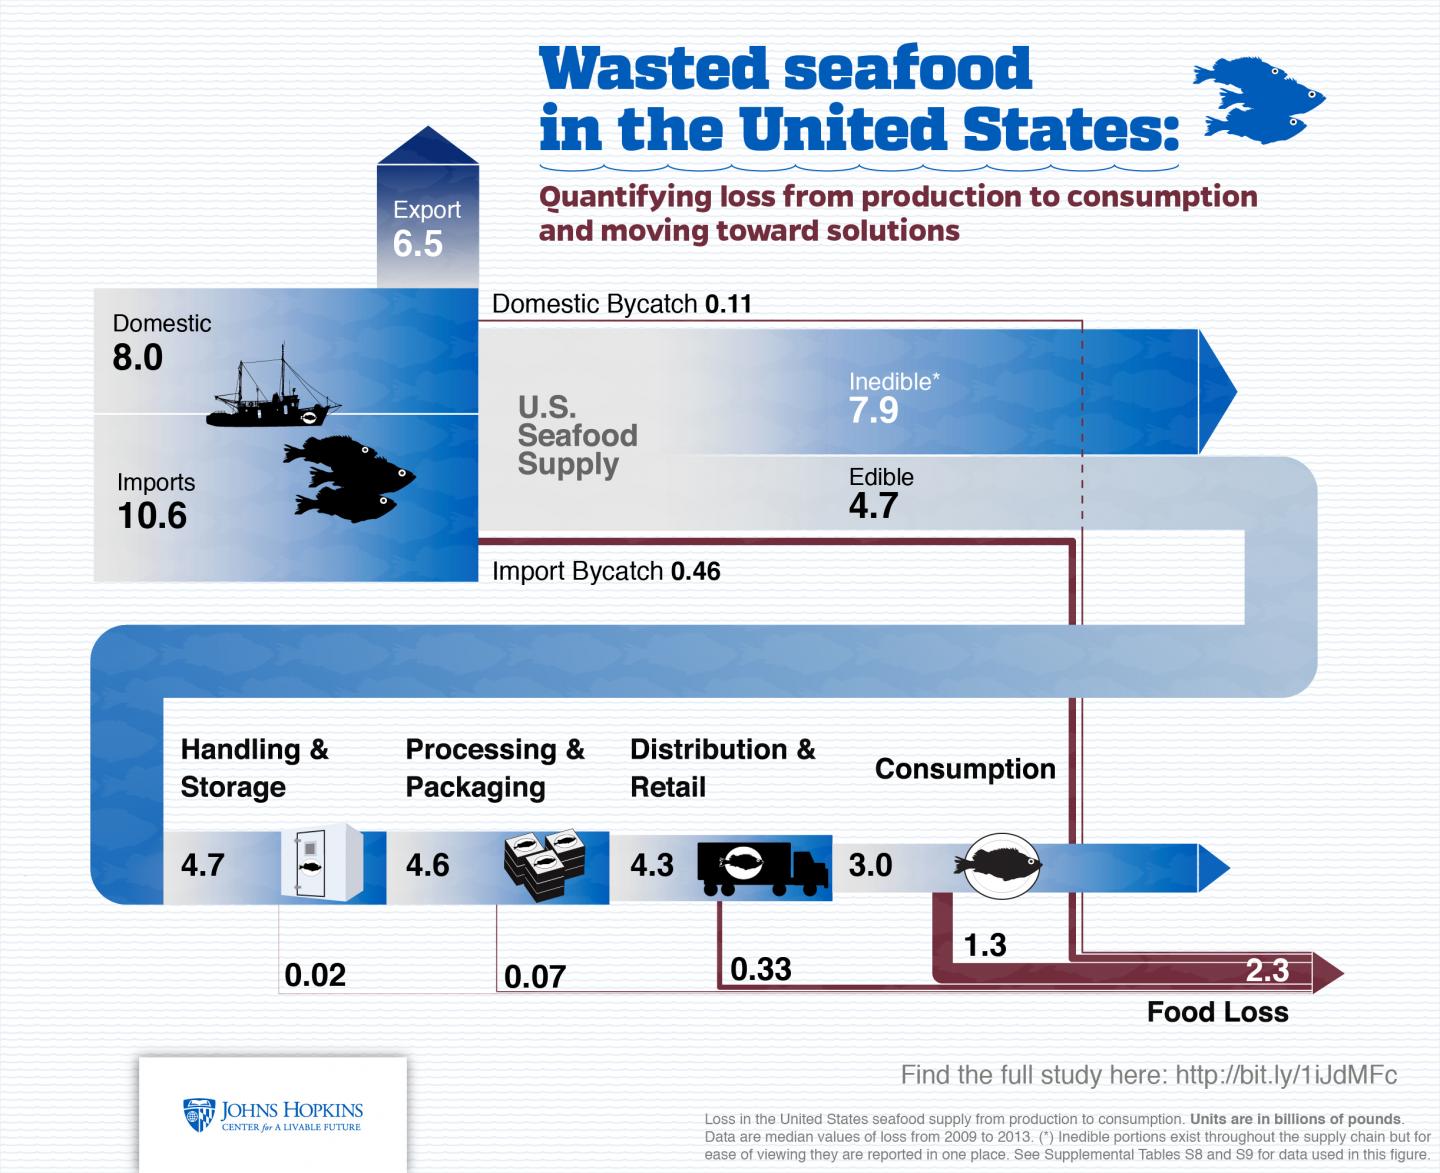 Seafood Waste in the US